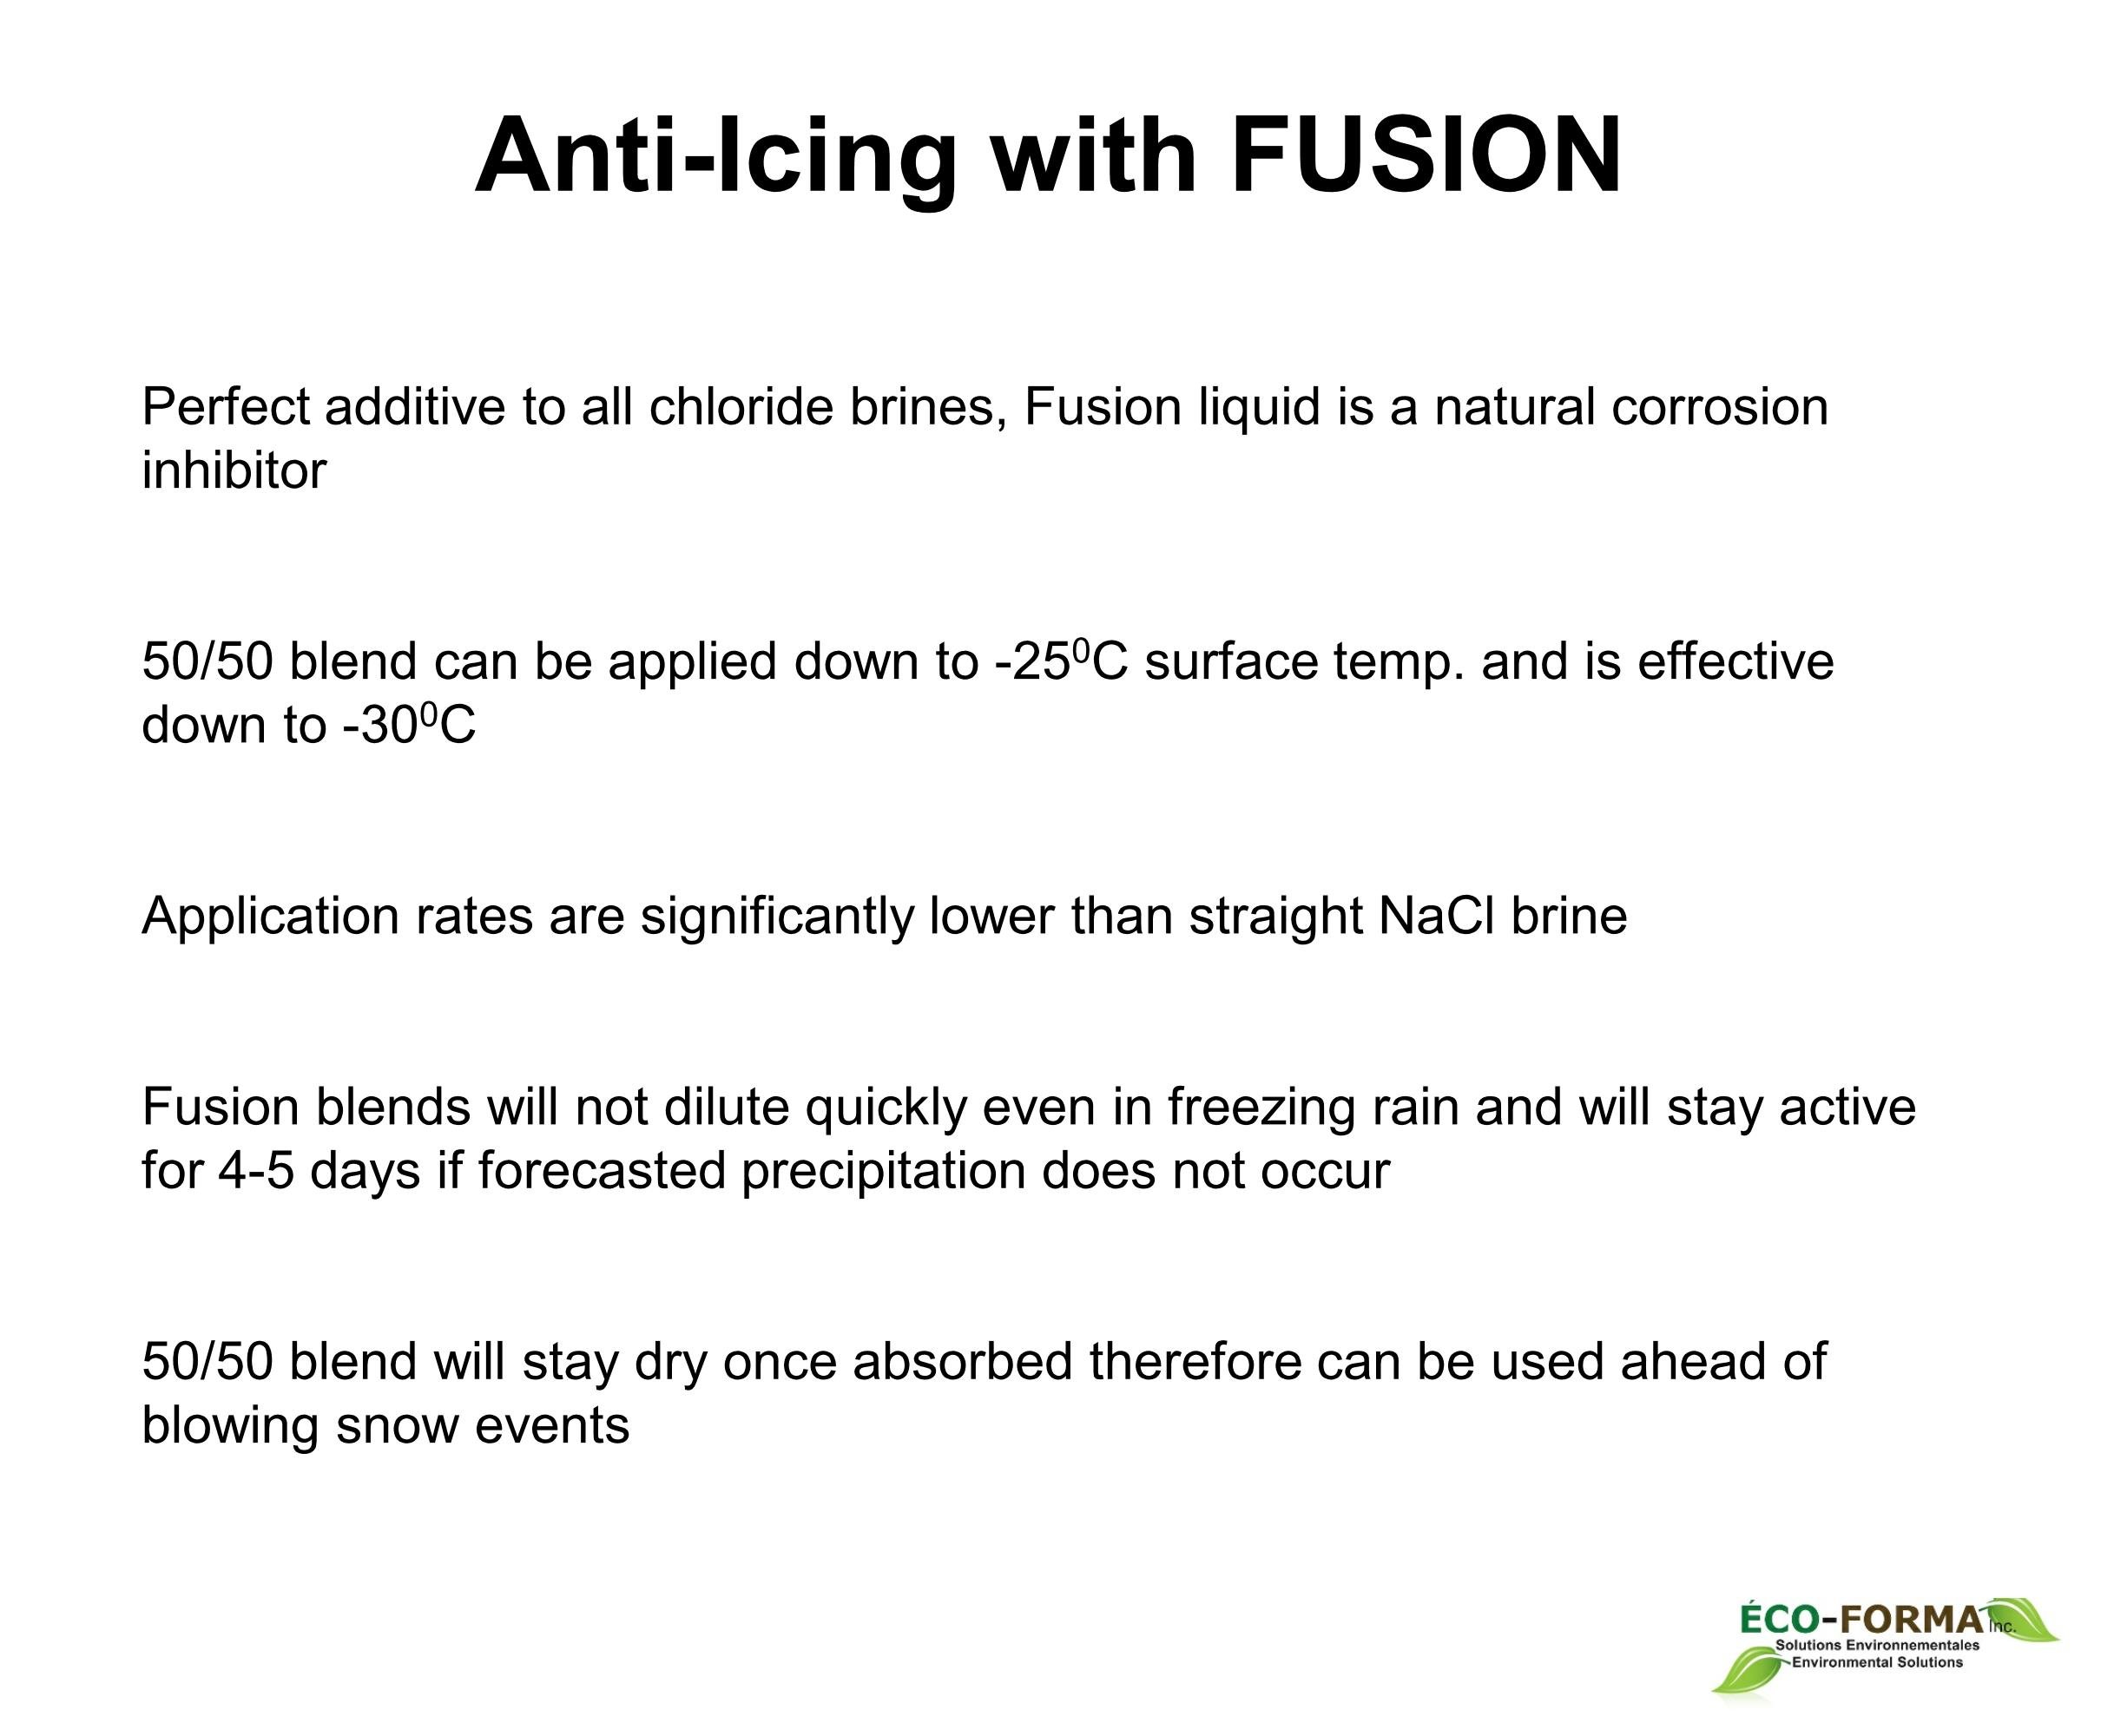 Eco-Forma_Anti-Icing with FUSION2350_St-Constant - 2021 02 14_ENGLISH_Page_5.jpeg